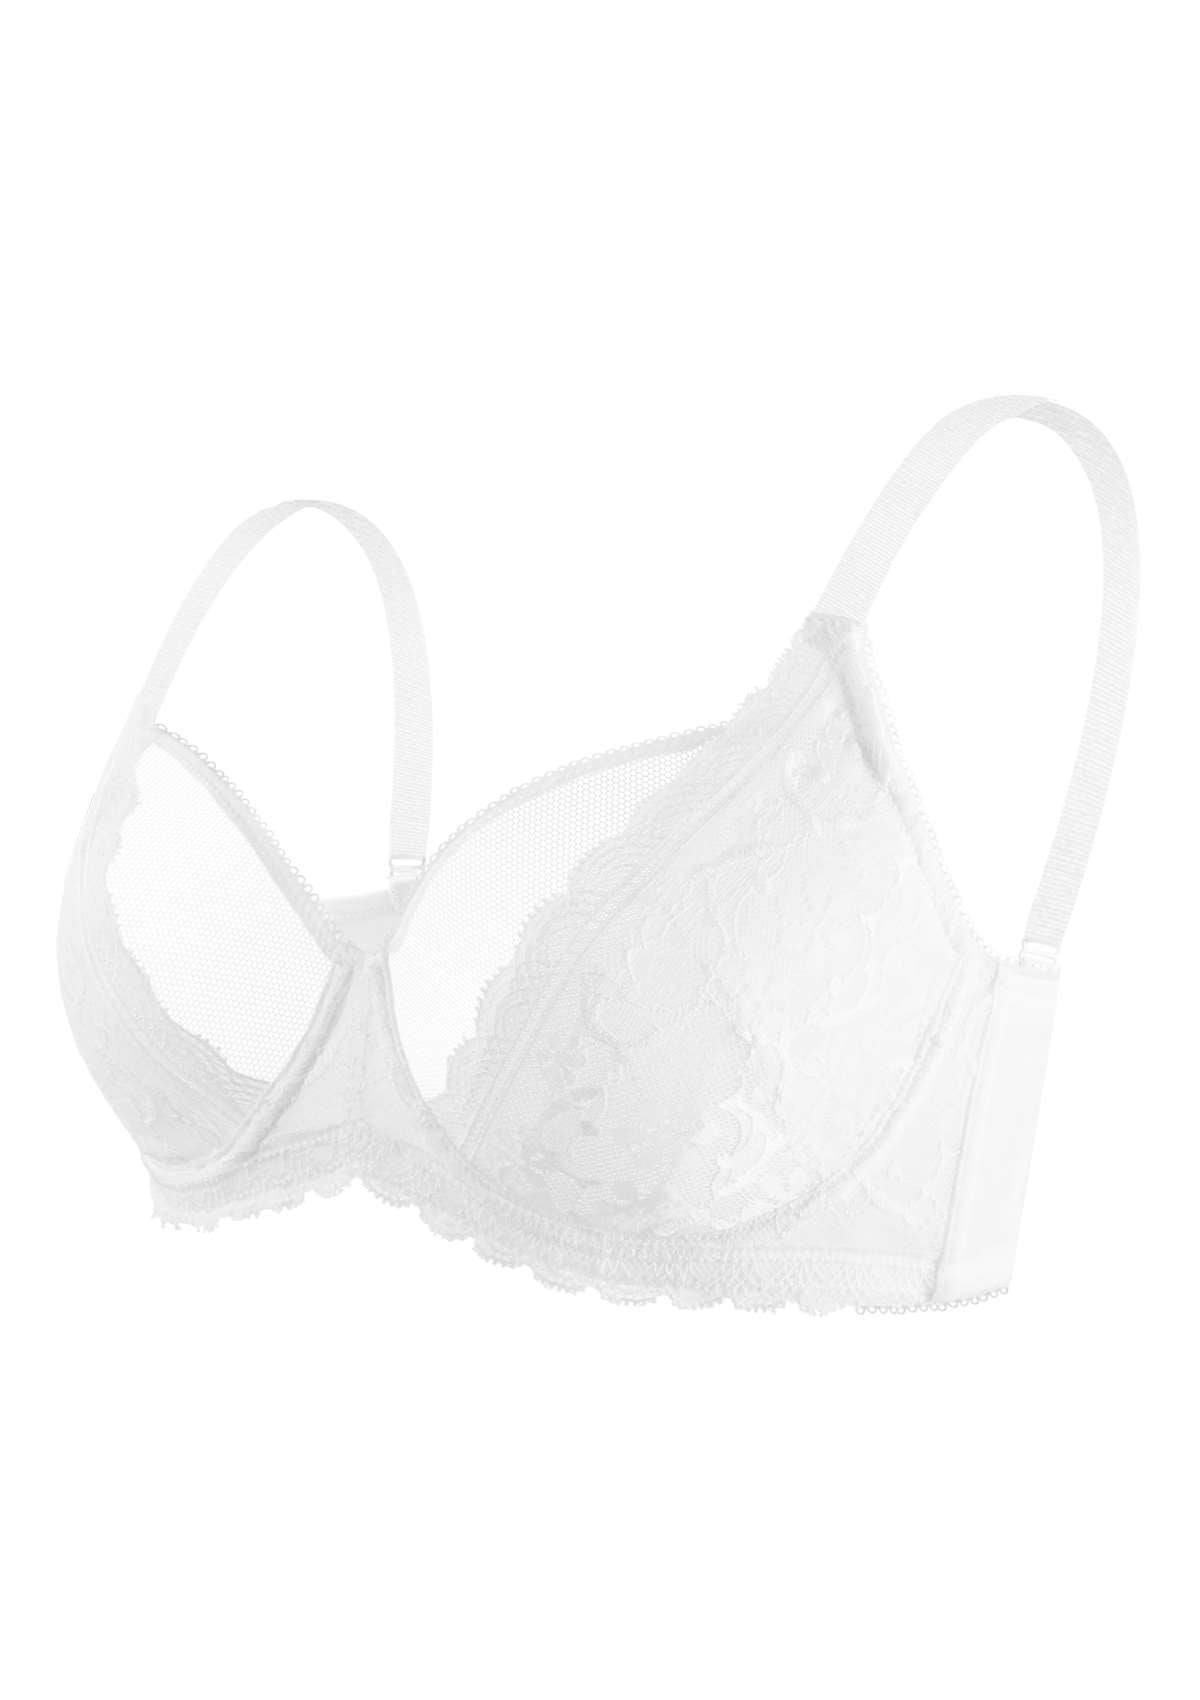 HSIA Anemone Big Bra: Best Bra For Lift And Support, Floral Bra - Light Blue / 36 / C